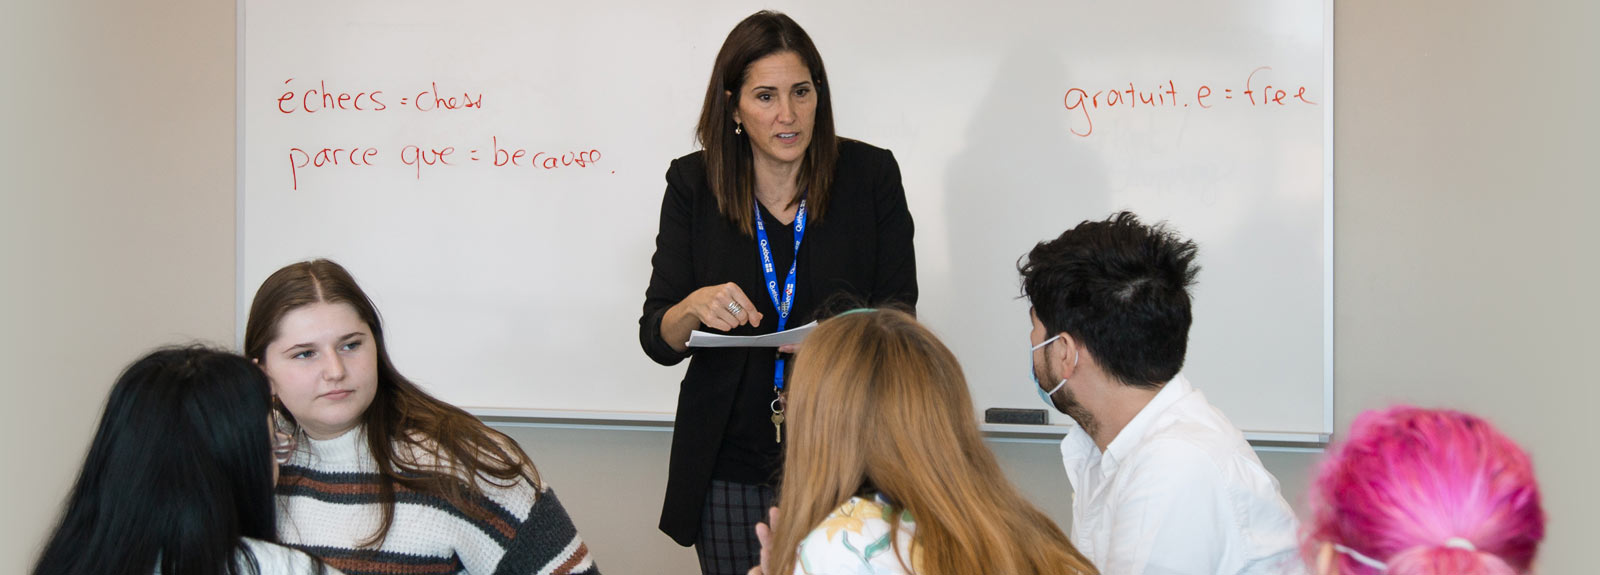 Instructor teaching French to students in classroom